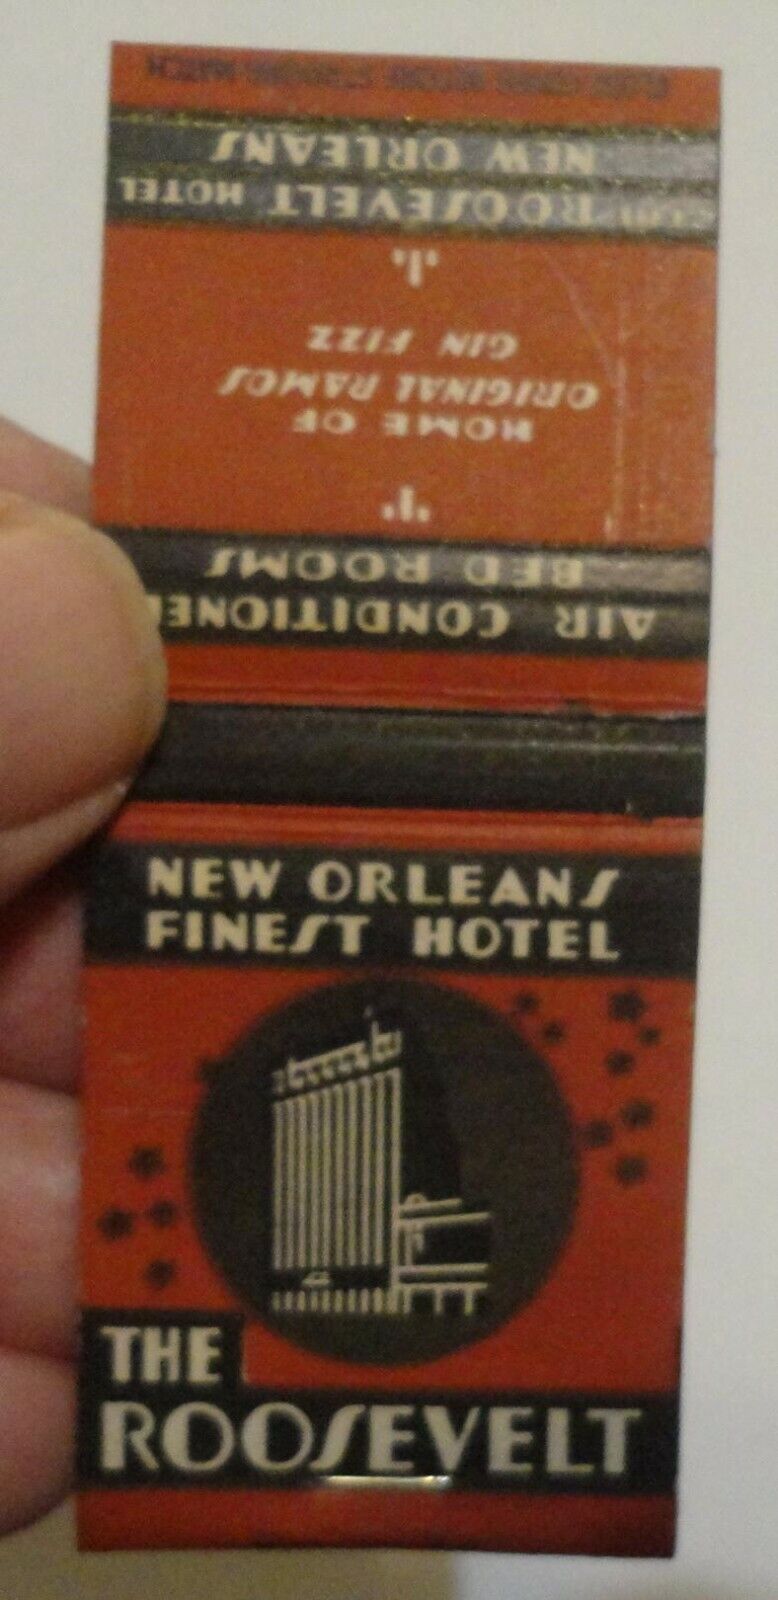 c1930s New Orleans Louisiana The Roosevelt Hotel matchbook